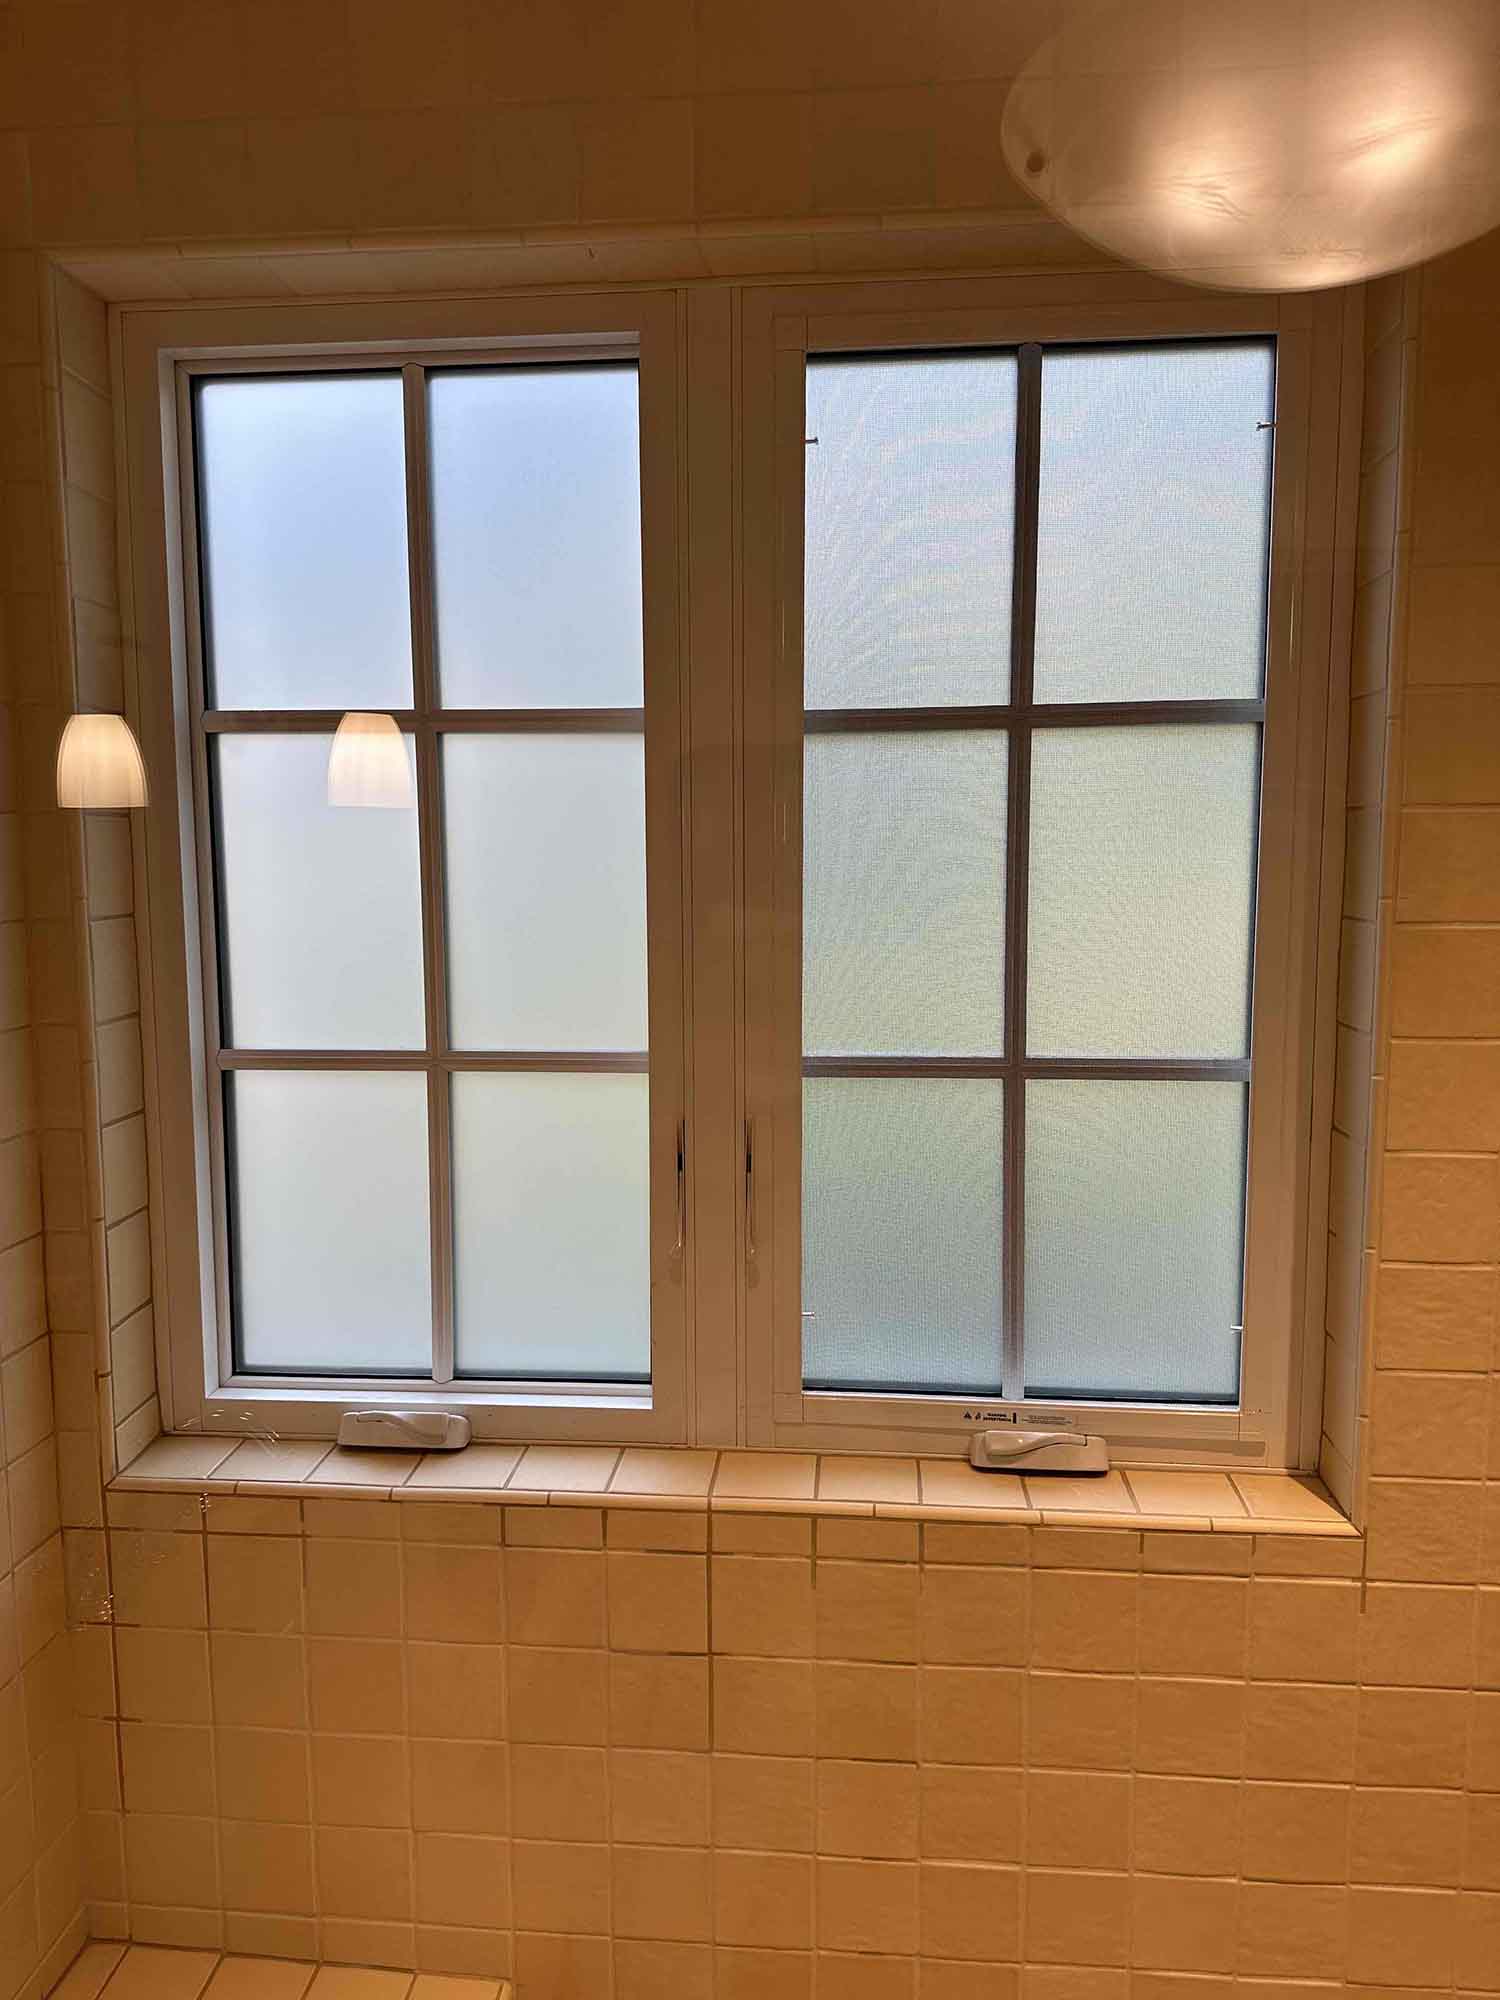 ClimatePro Installs Privacy Window Film for Bathrooms in San Anselmo, CA